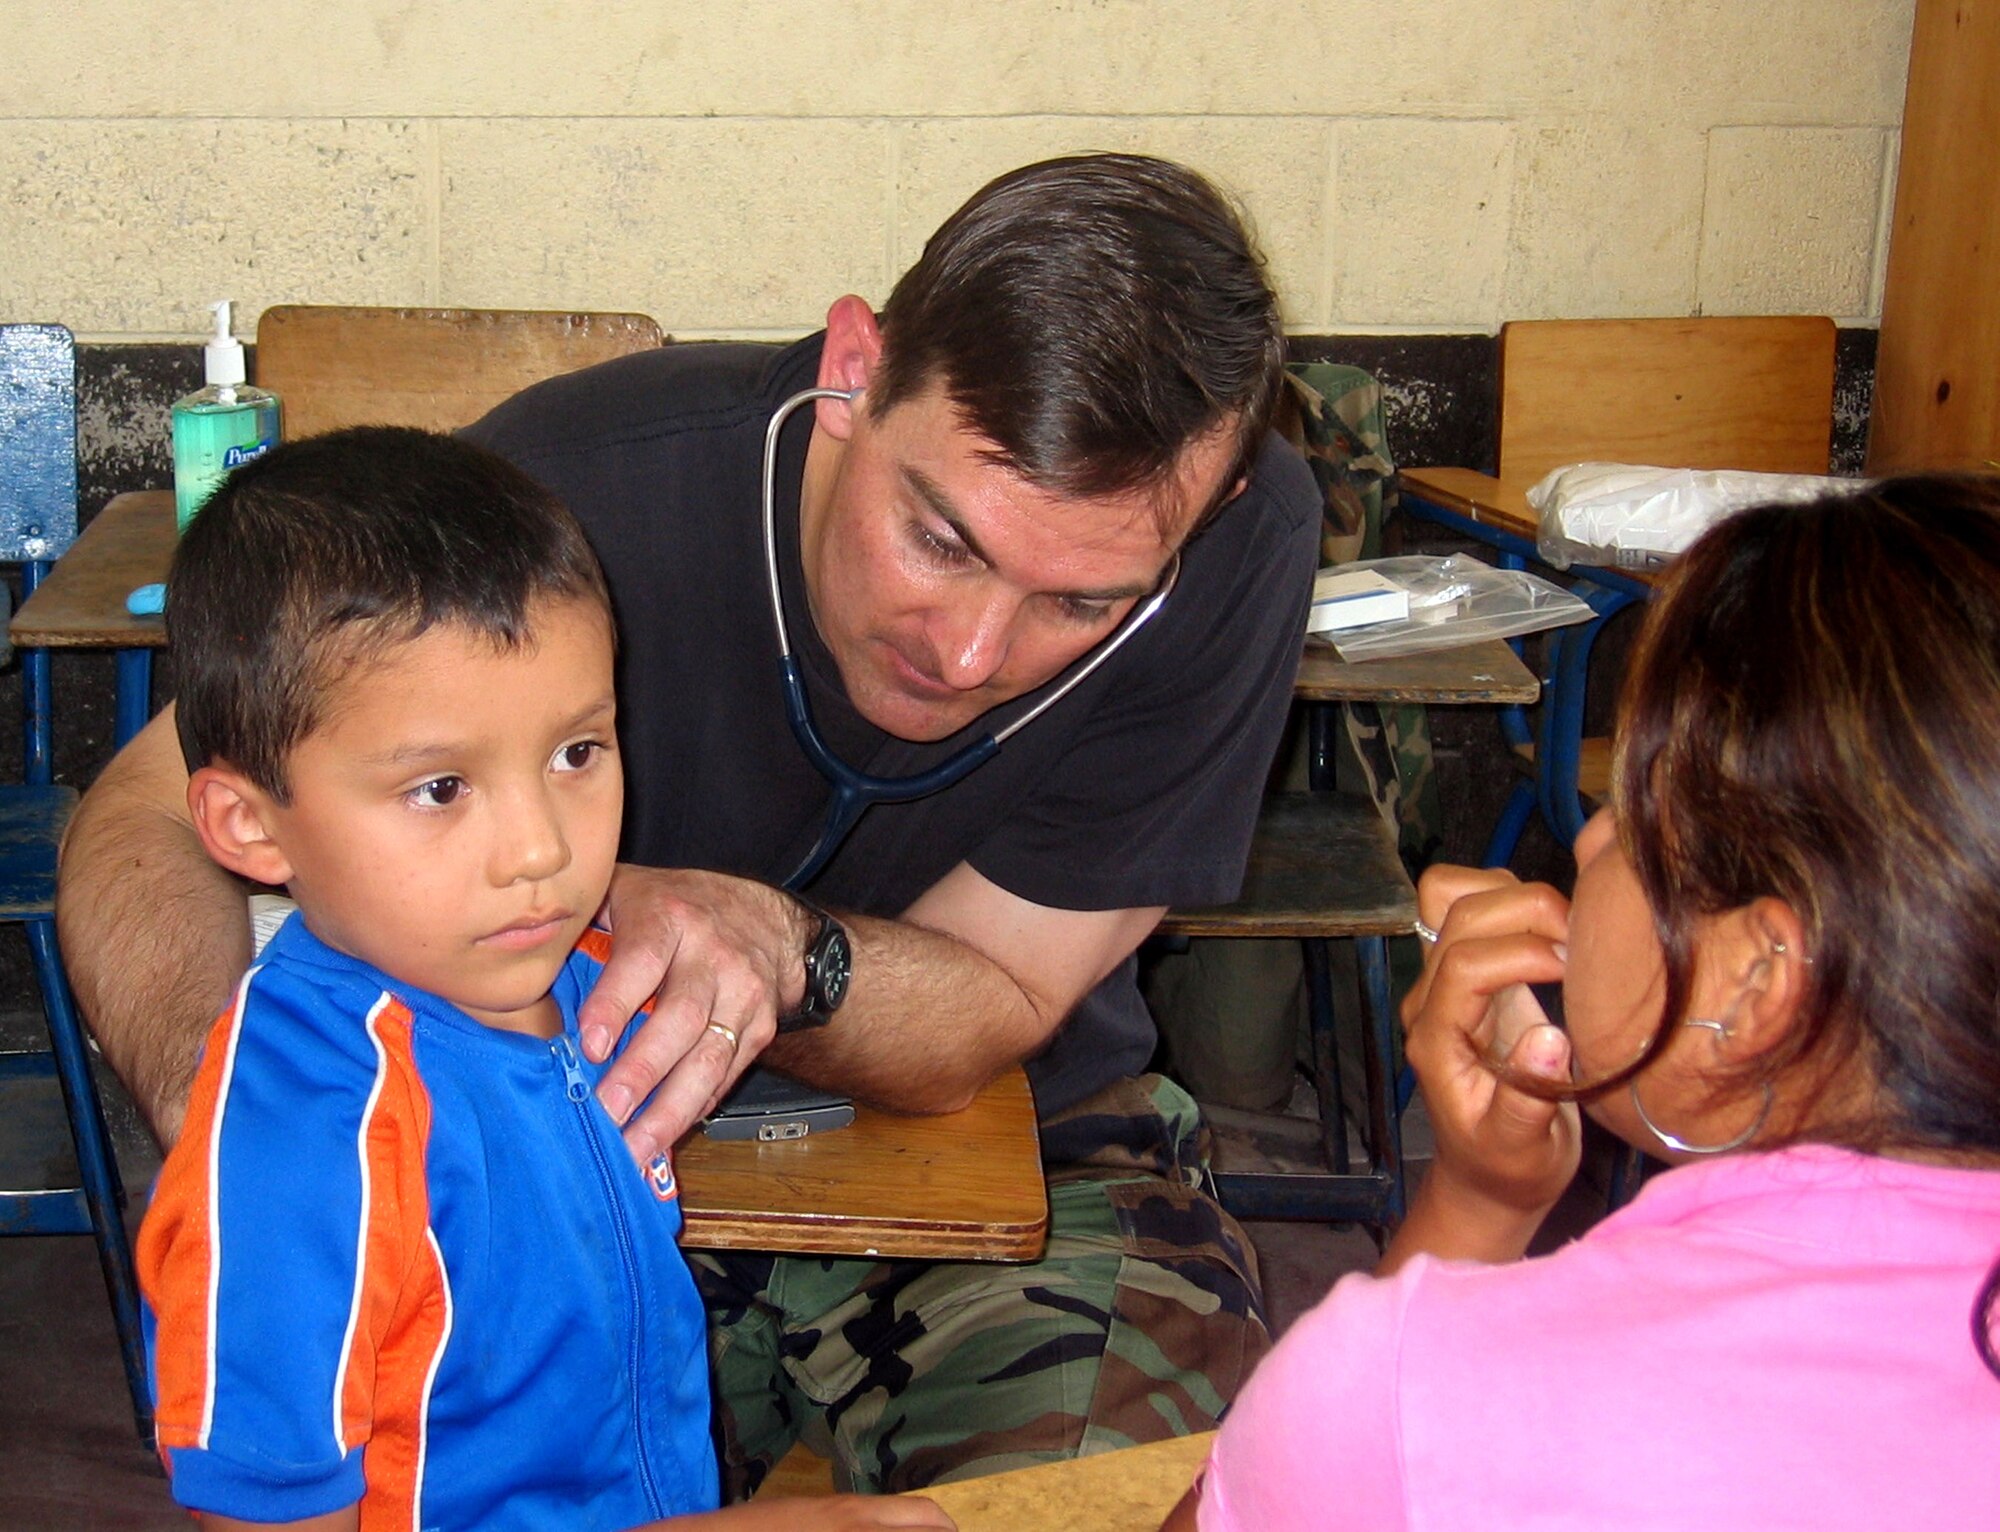 Maj. (Dr.) Michael Stevens, a pediatrician from Peterson Air Force Base, Colo., listens to a Guatemalan child's heartbeat, as the boy's mother looks on. Doctor Nelson was part of a team of 13 medical professionals from Air Force Space Command that was sent to Guatemala for a 10-day humanitarian mission in April. The team saw more than 8,000 patients during that time. (U.S. Air Force photo)